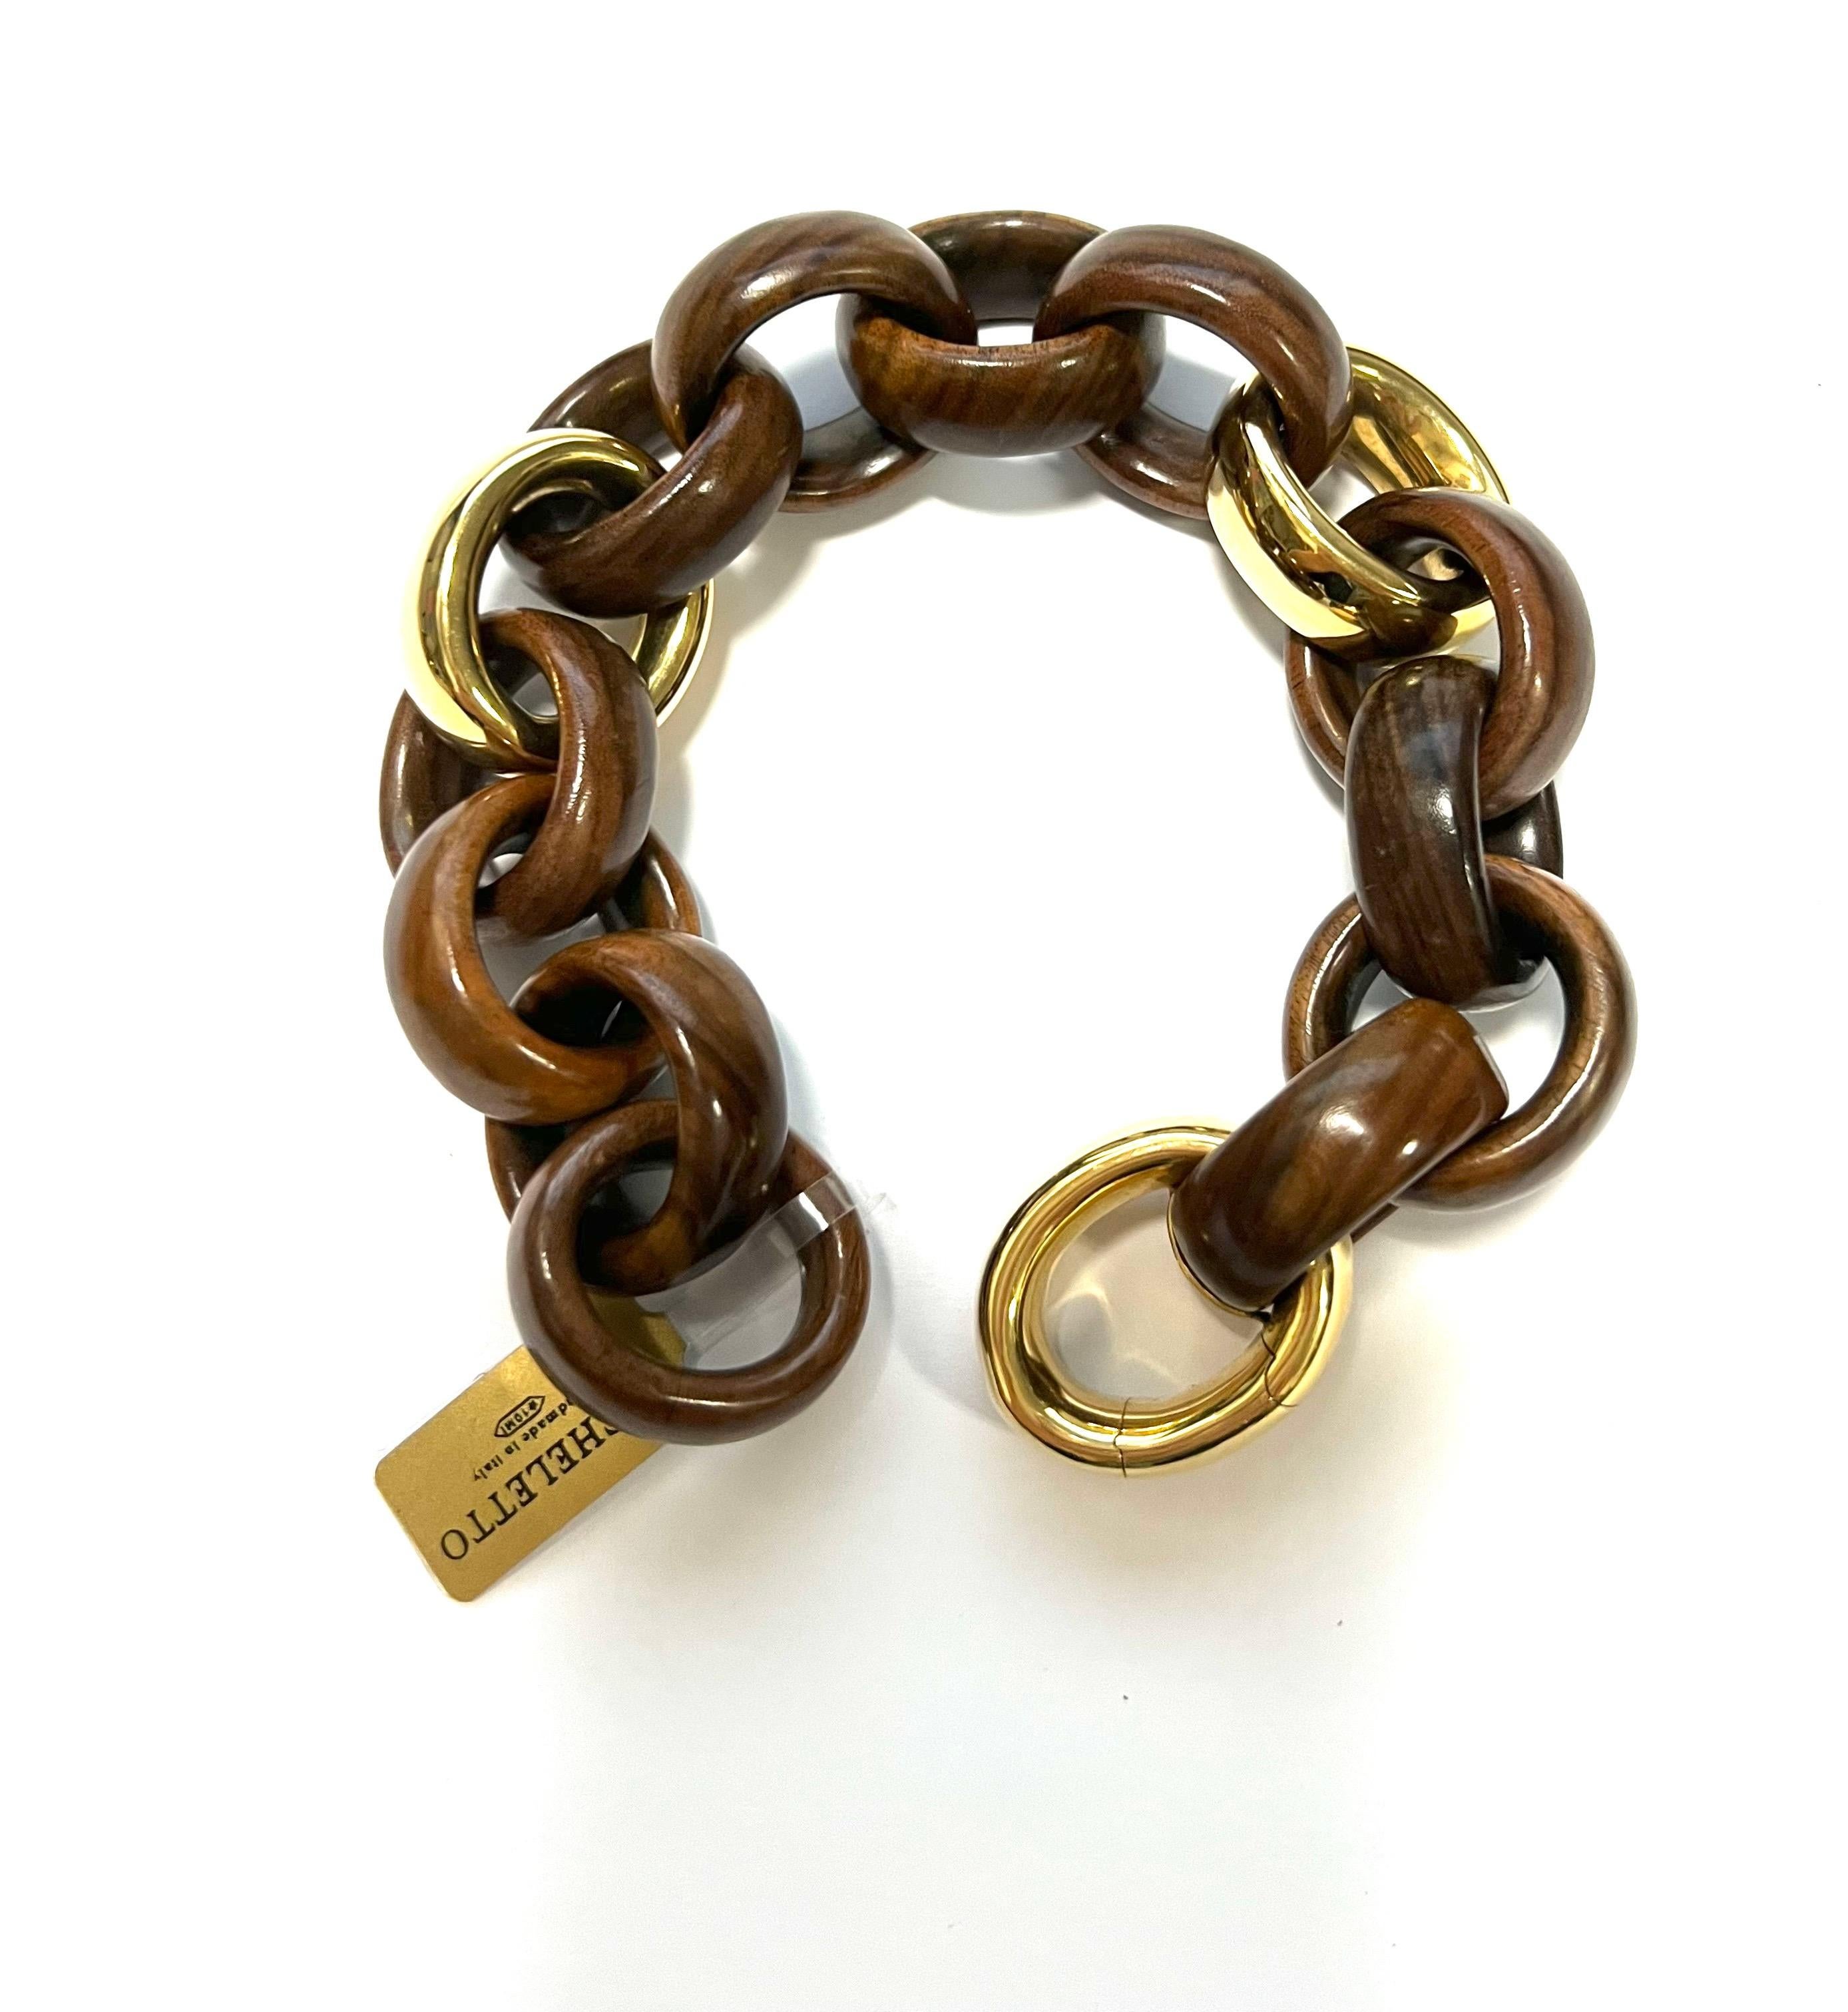 18 Karat Yellow Gold and Palissander Link Bracelet
Modern wood and yellow gold bracelet with hidden opening.
Total weight gr. 50,5
Gold weight gr. 24
Length cm 23
Stamp 750,  10 MI, ITALY  

This item can make set with 4659-Z 15/B 17 (Earrings) and